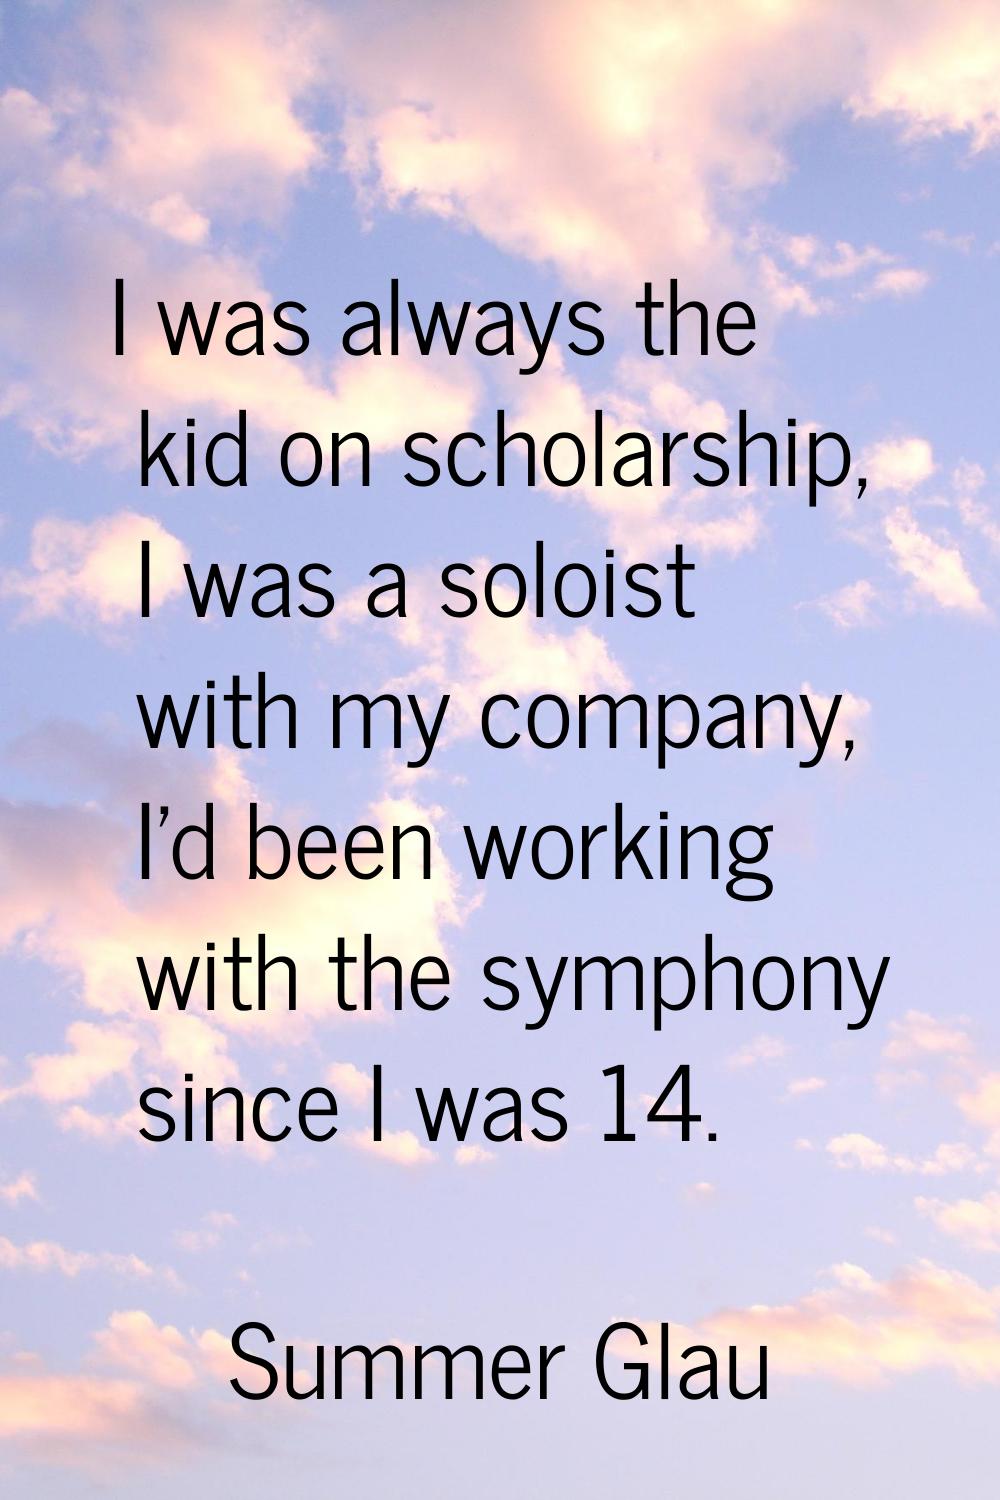 I was always the kid on scholarship, I was a soloist with my company, I'd been working with the sym